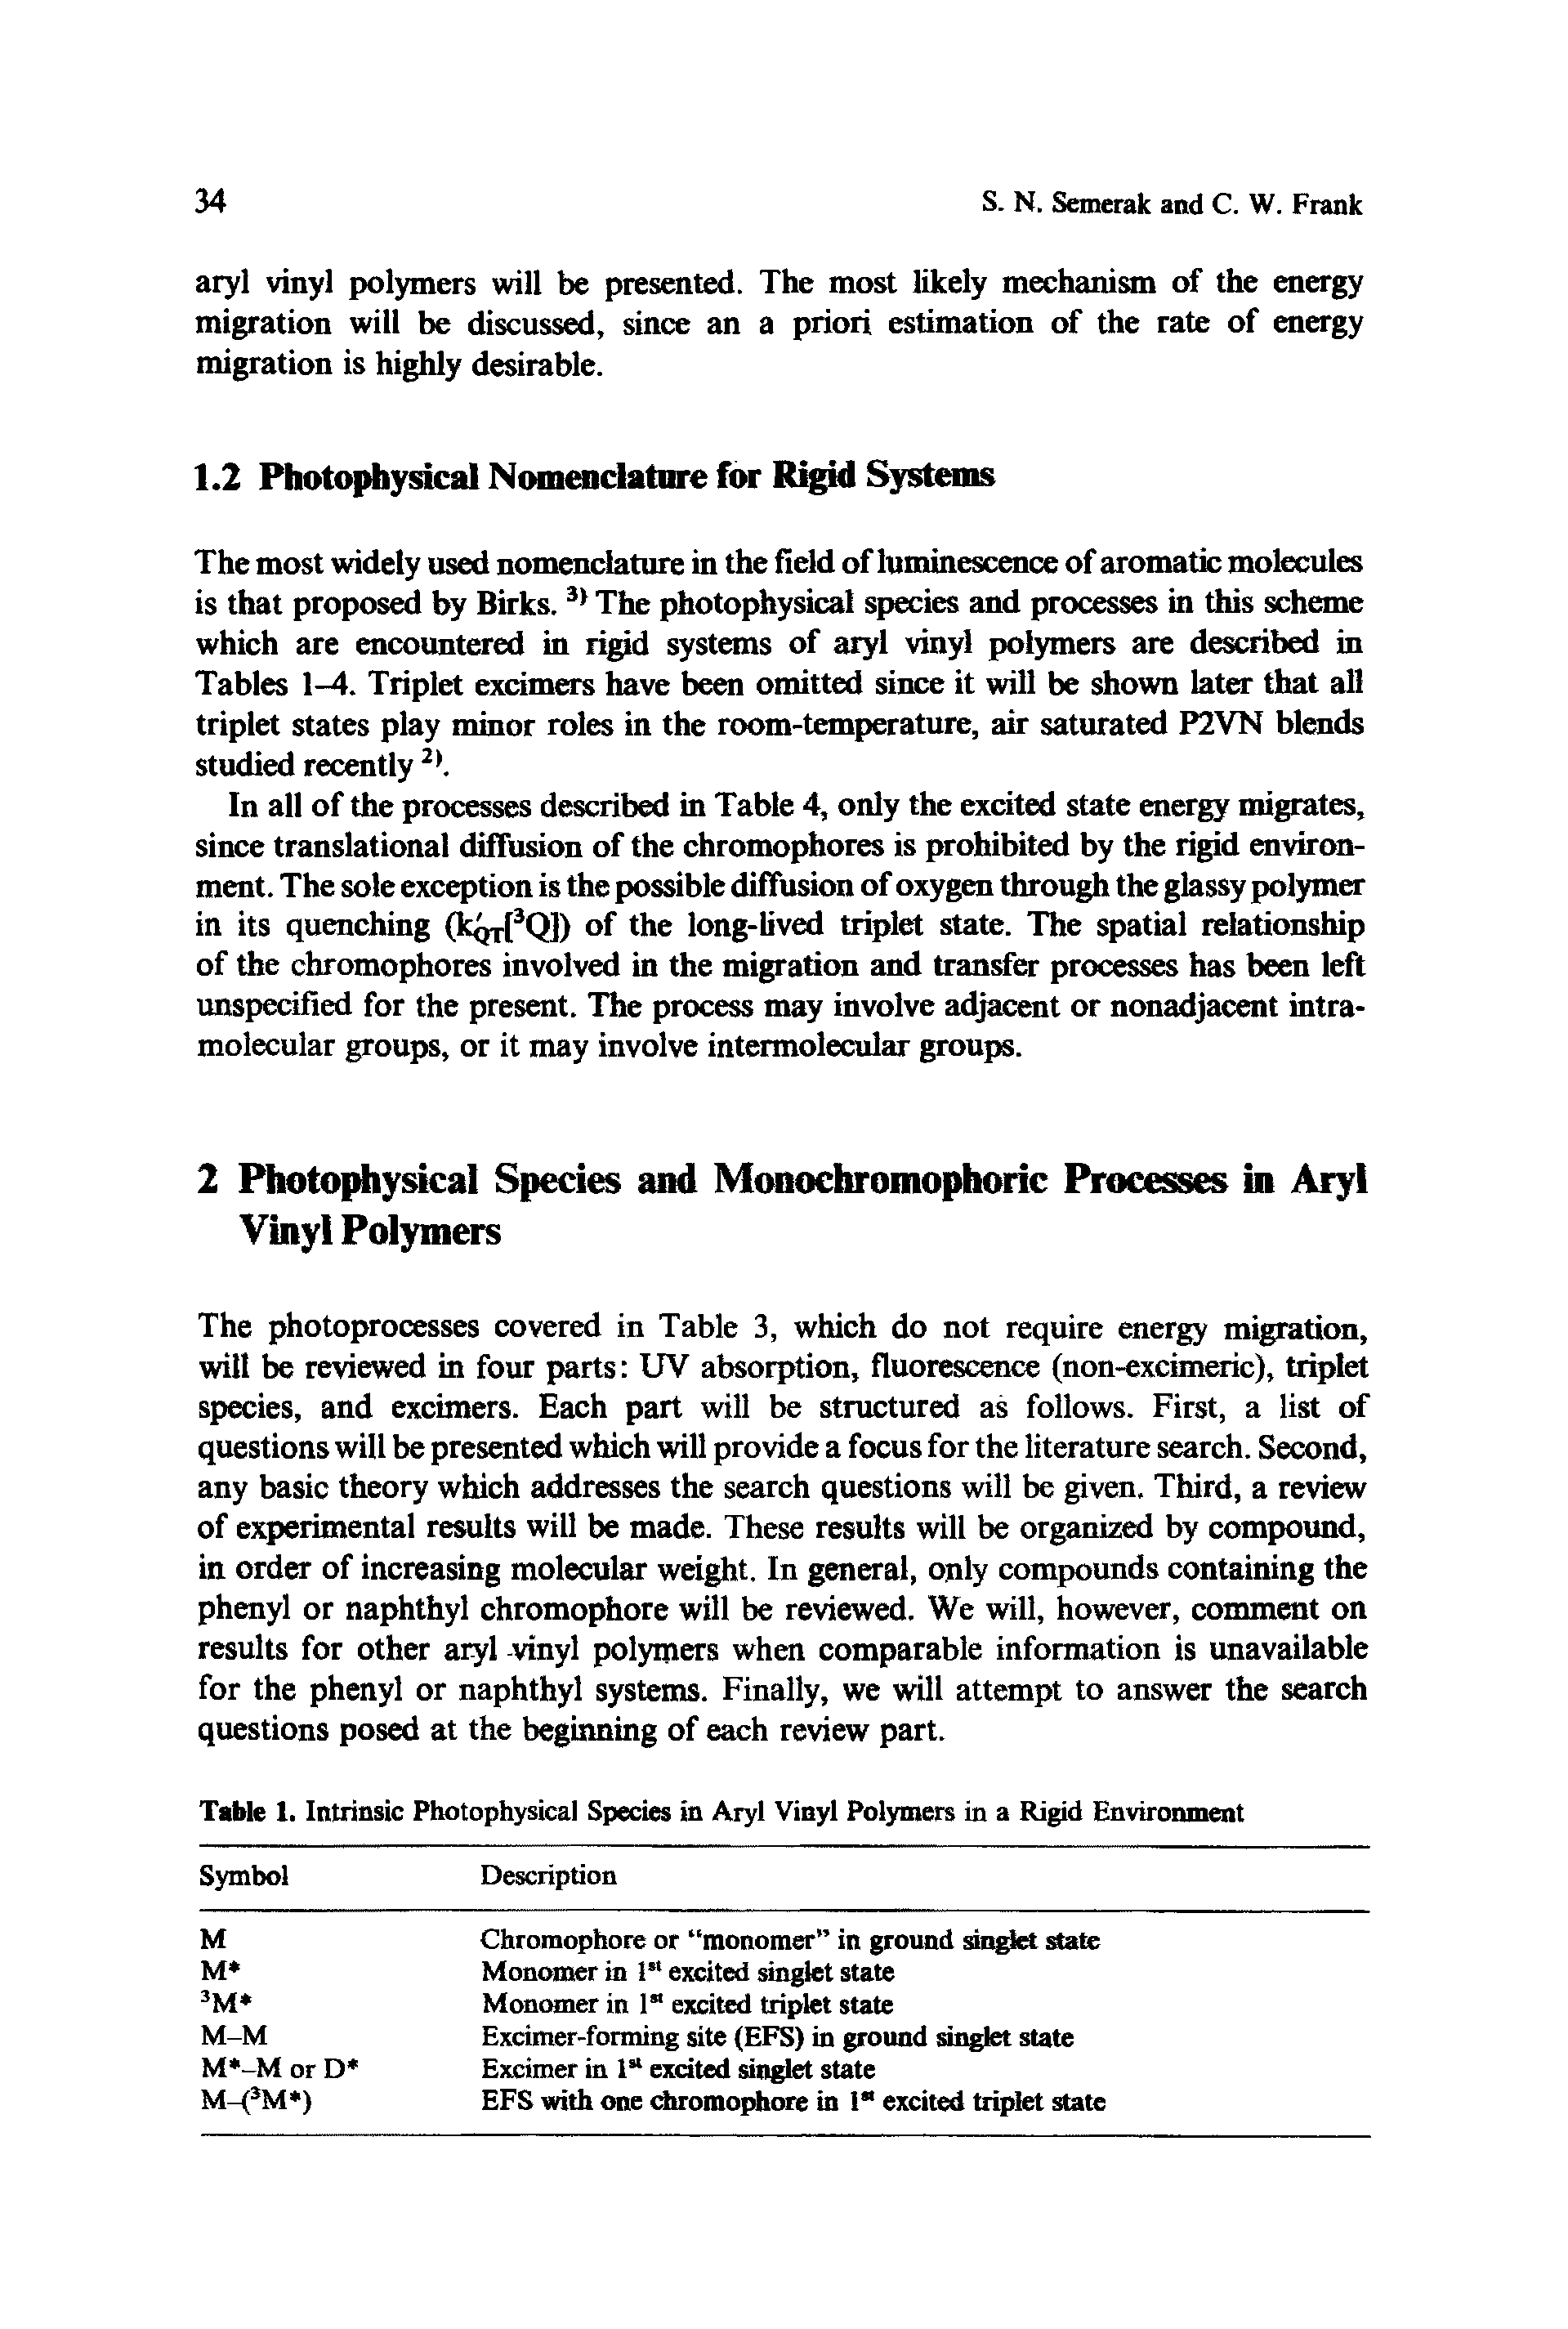 Table 1. Intrinsic Photophysical Species in Aryl Vinyl Polymers in a Rigid Environment...